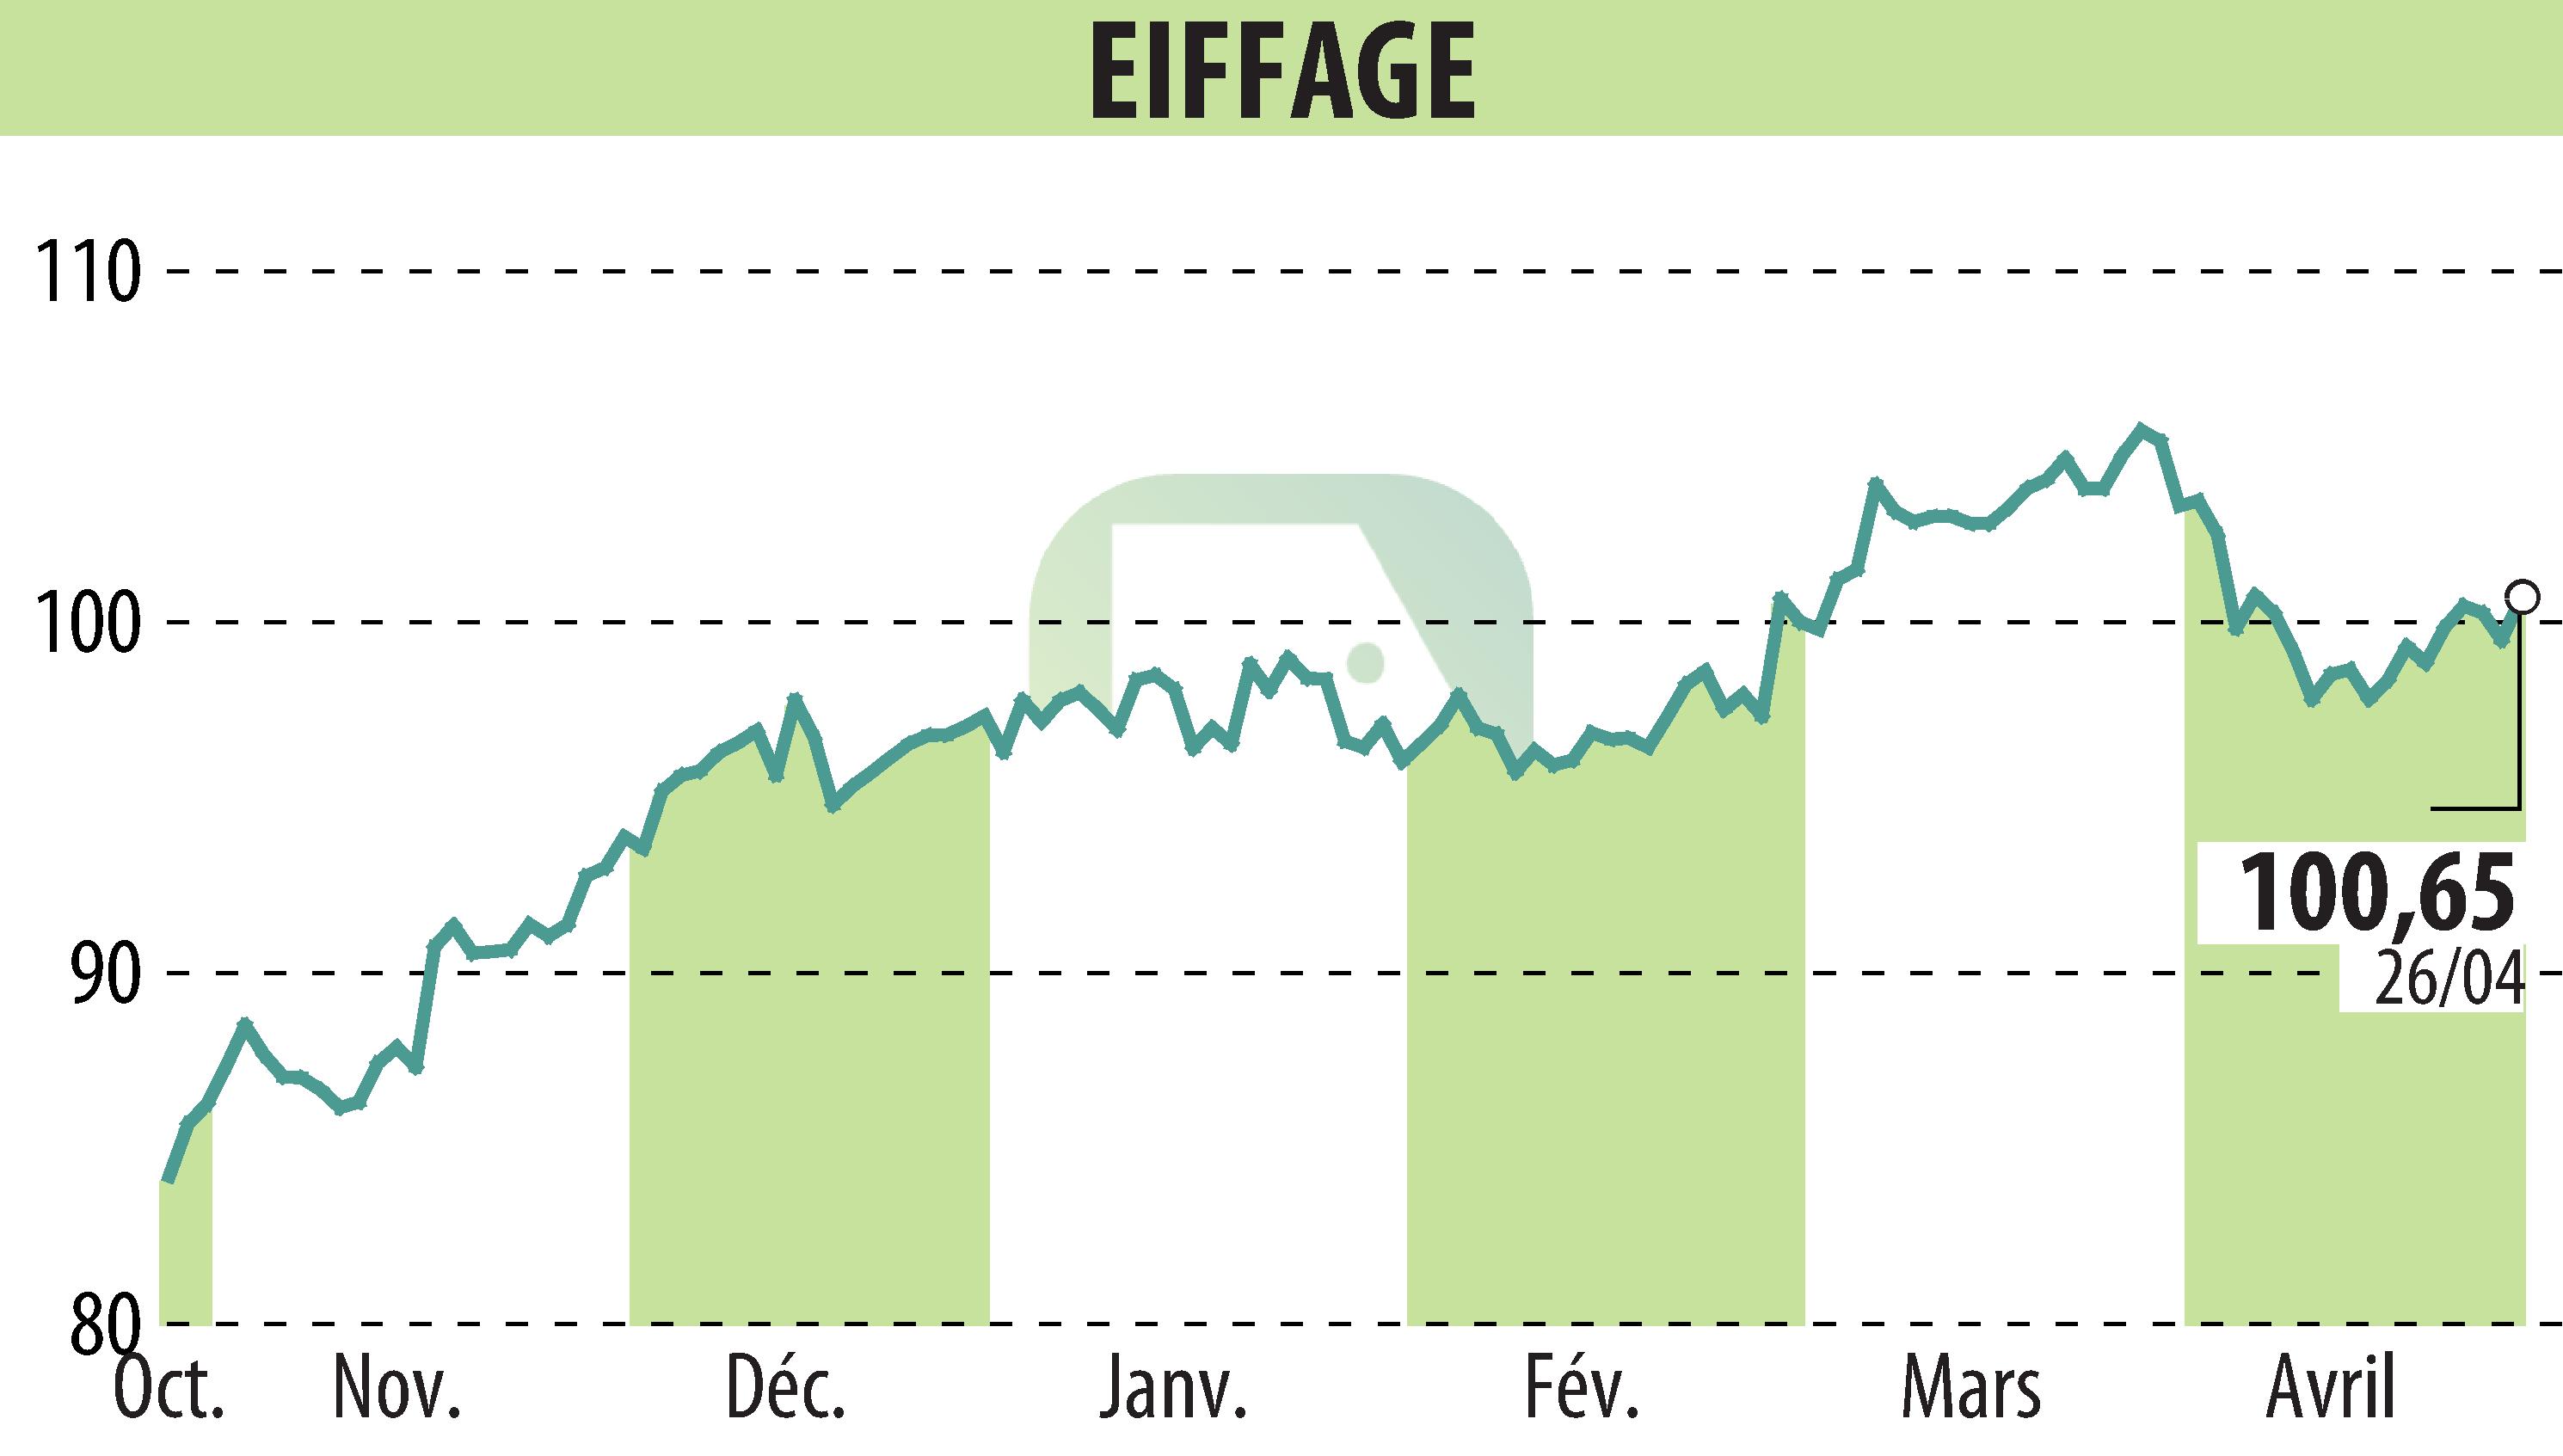 Stock price chart of EIFFAGE (EPA:FGR) showing fluctuations.